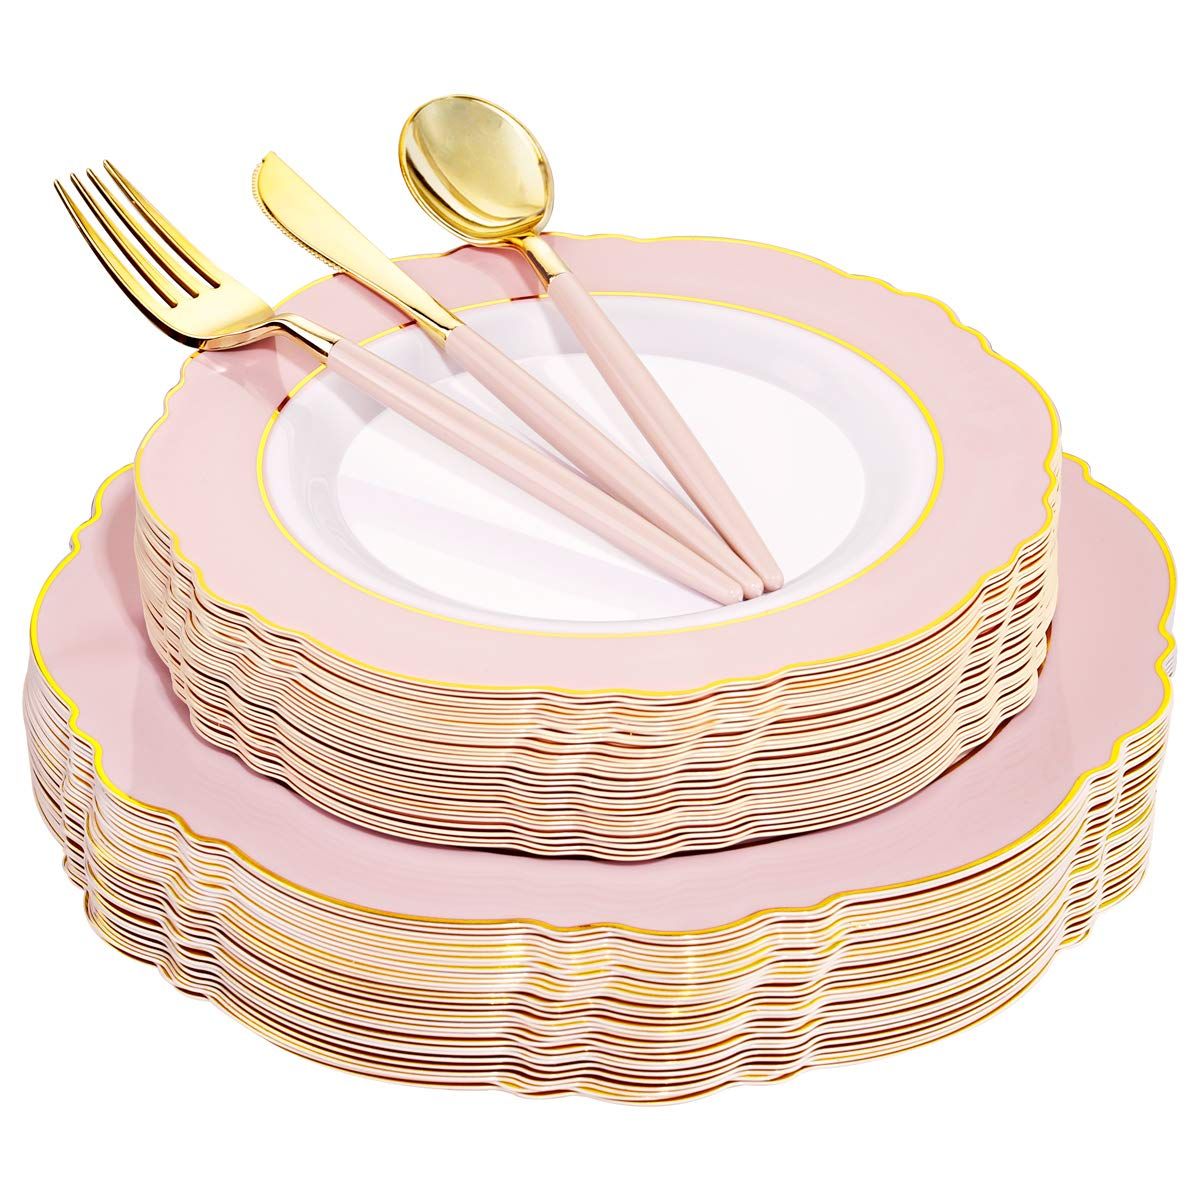 WDF 30Guest Pink Plastic Plates & Gold Plastic Silverware With Pink Handle-Baroque Pink &Gold Plasti | Amazon (US)